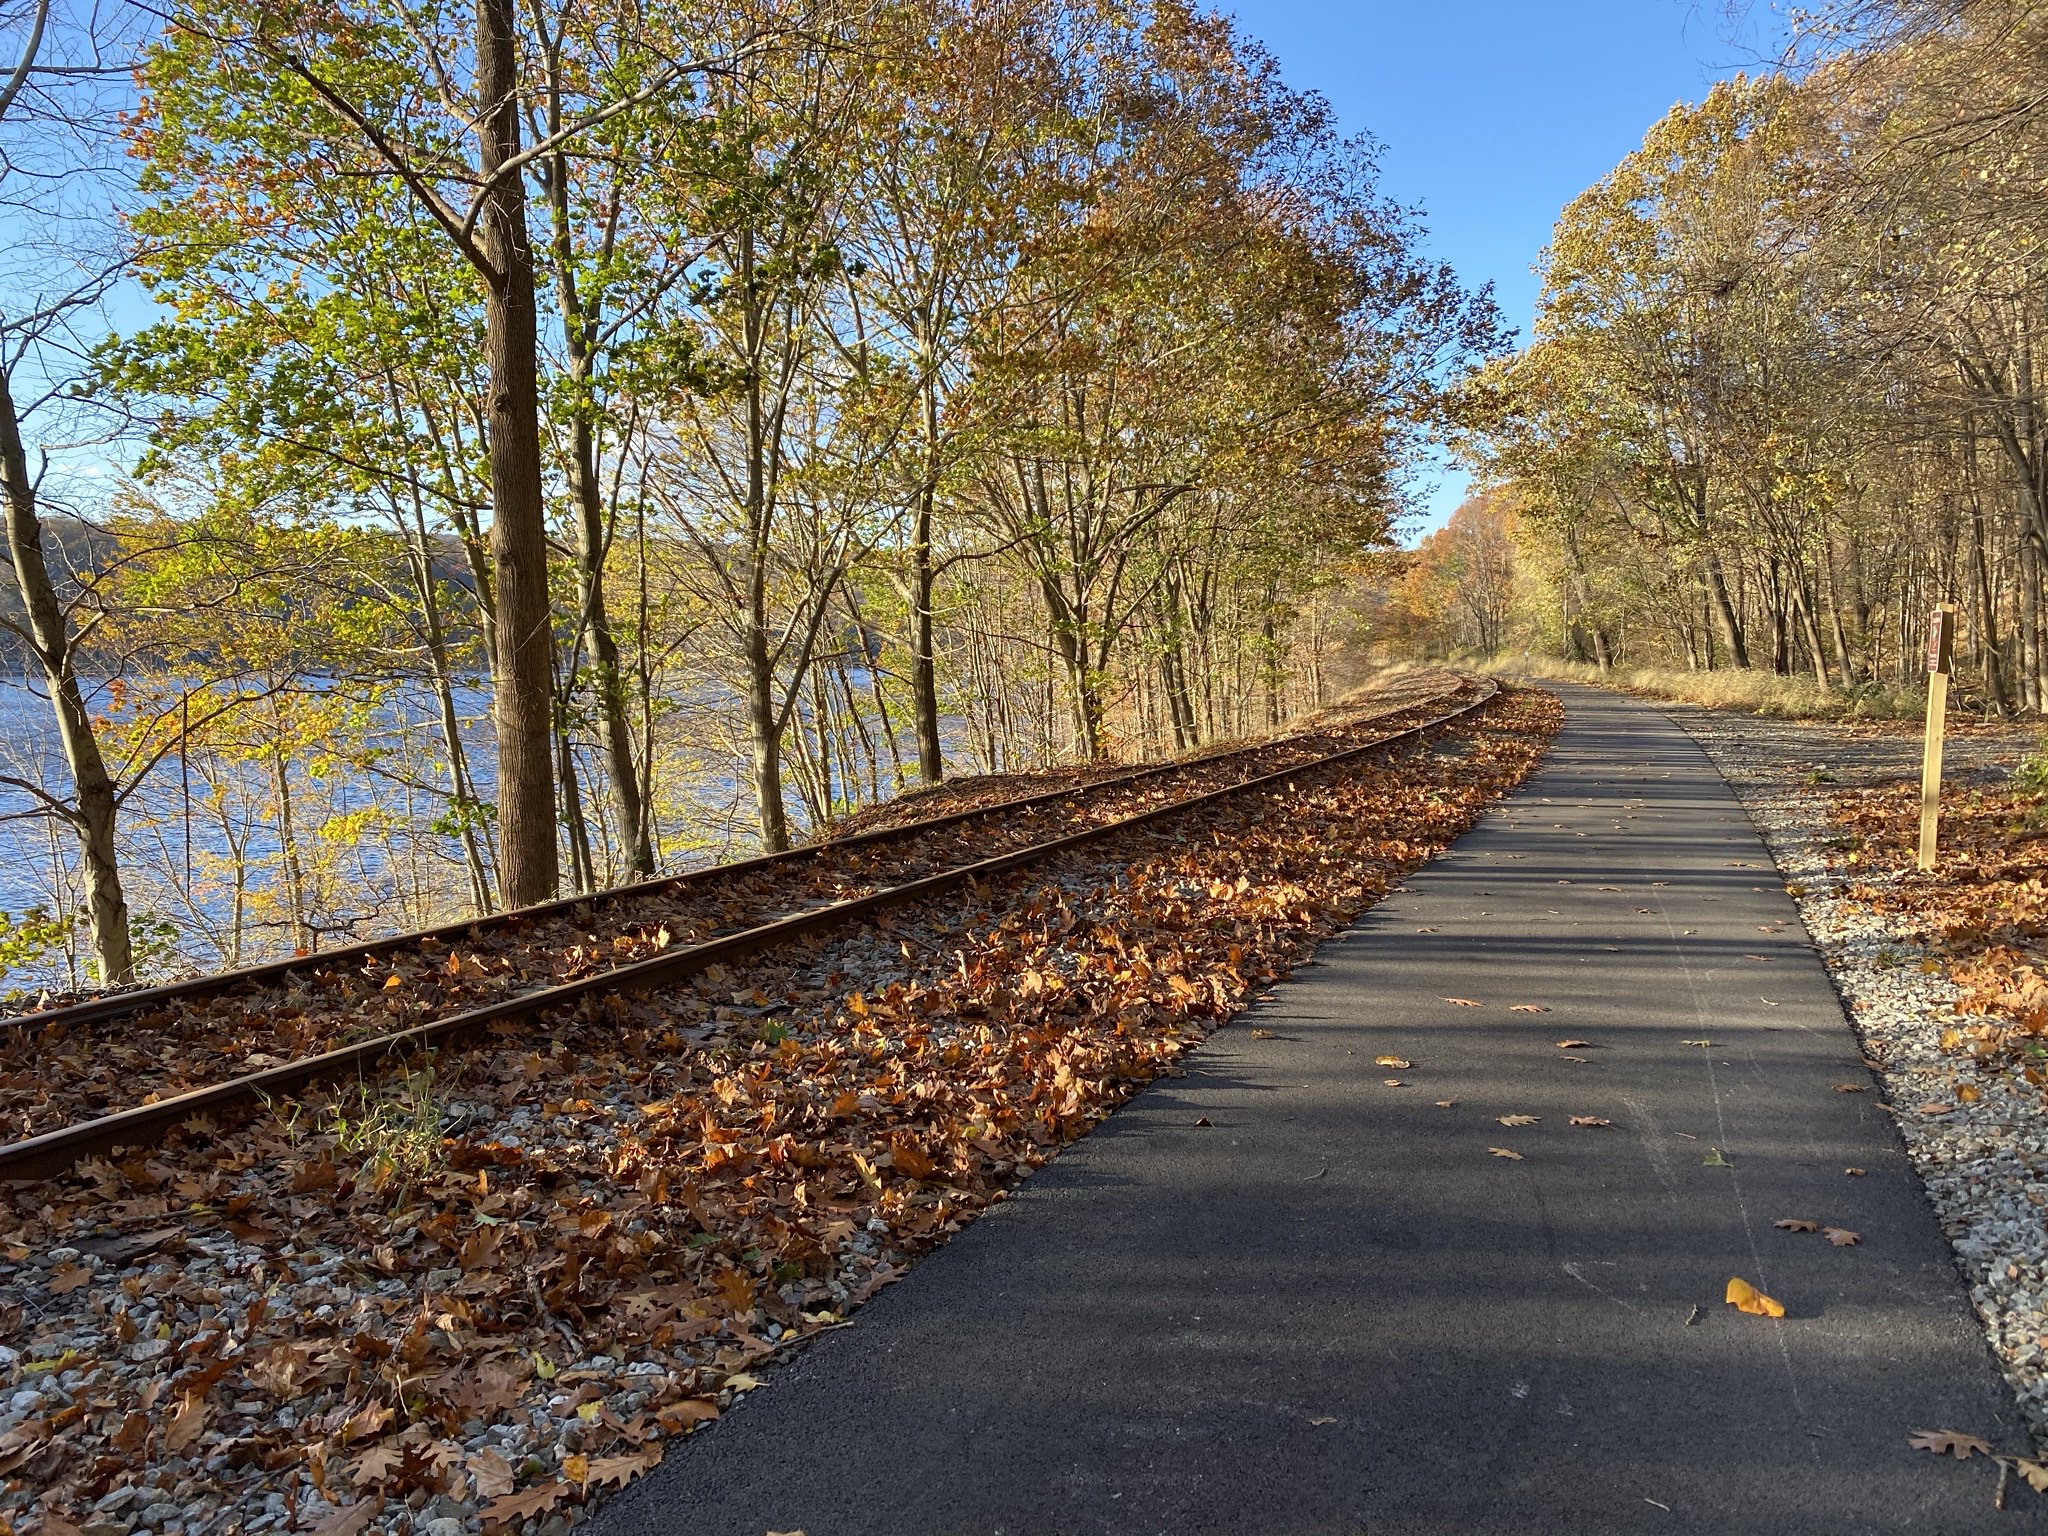 Paved trail next to decommissioned rail line next to body of water